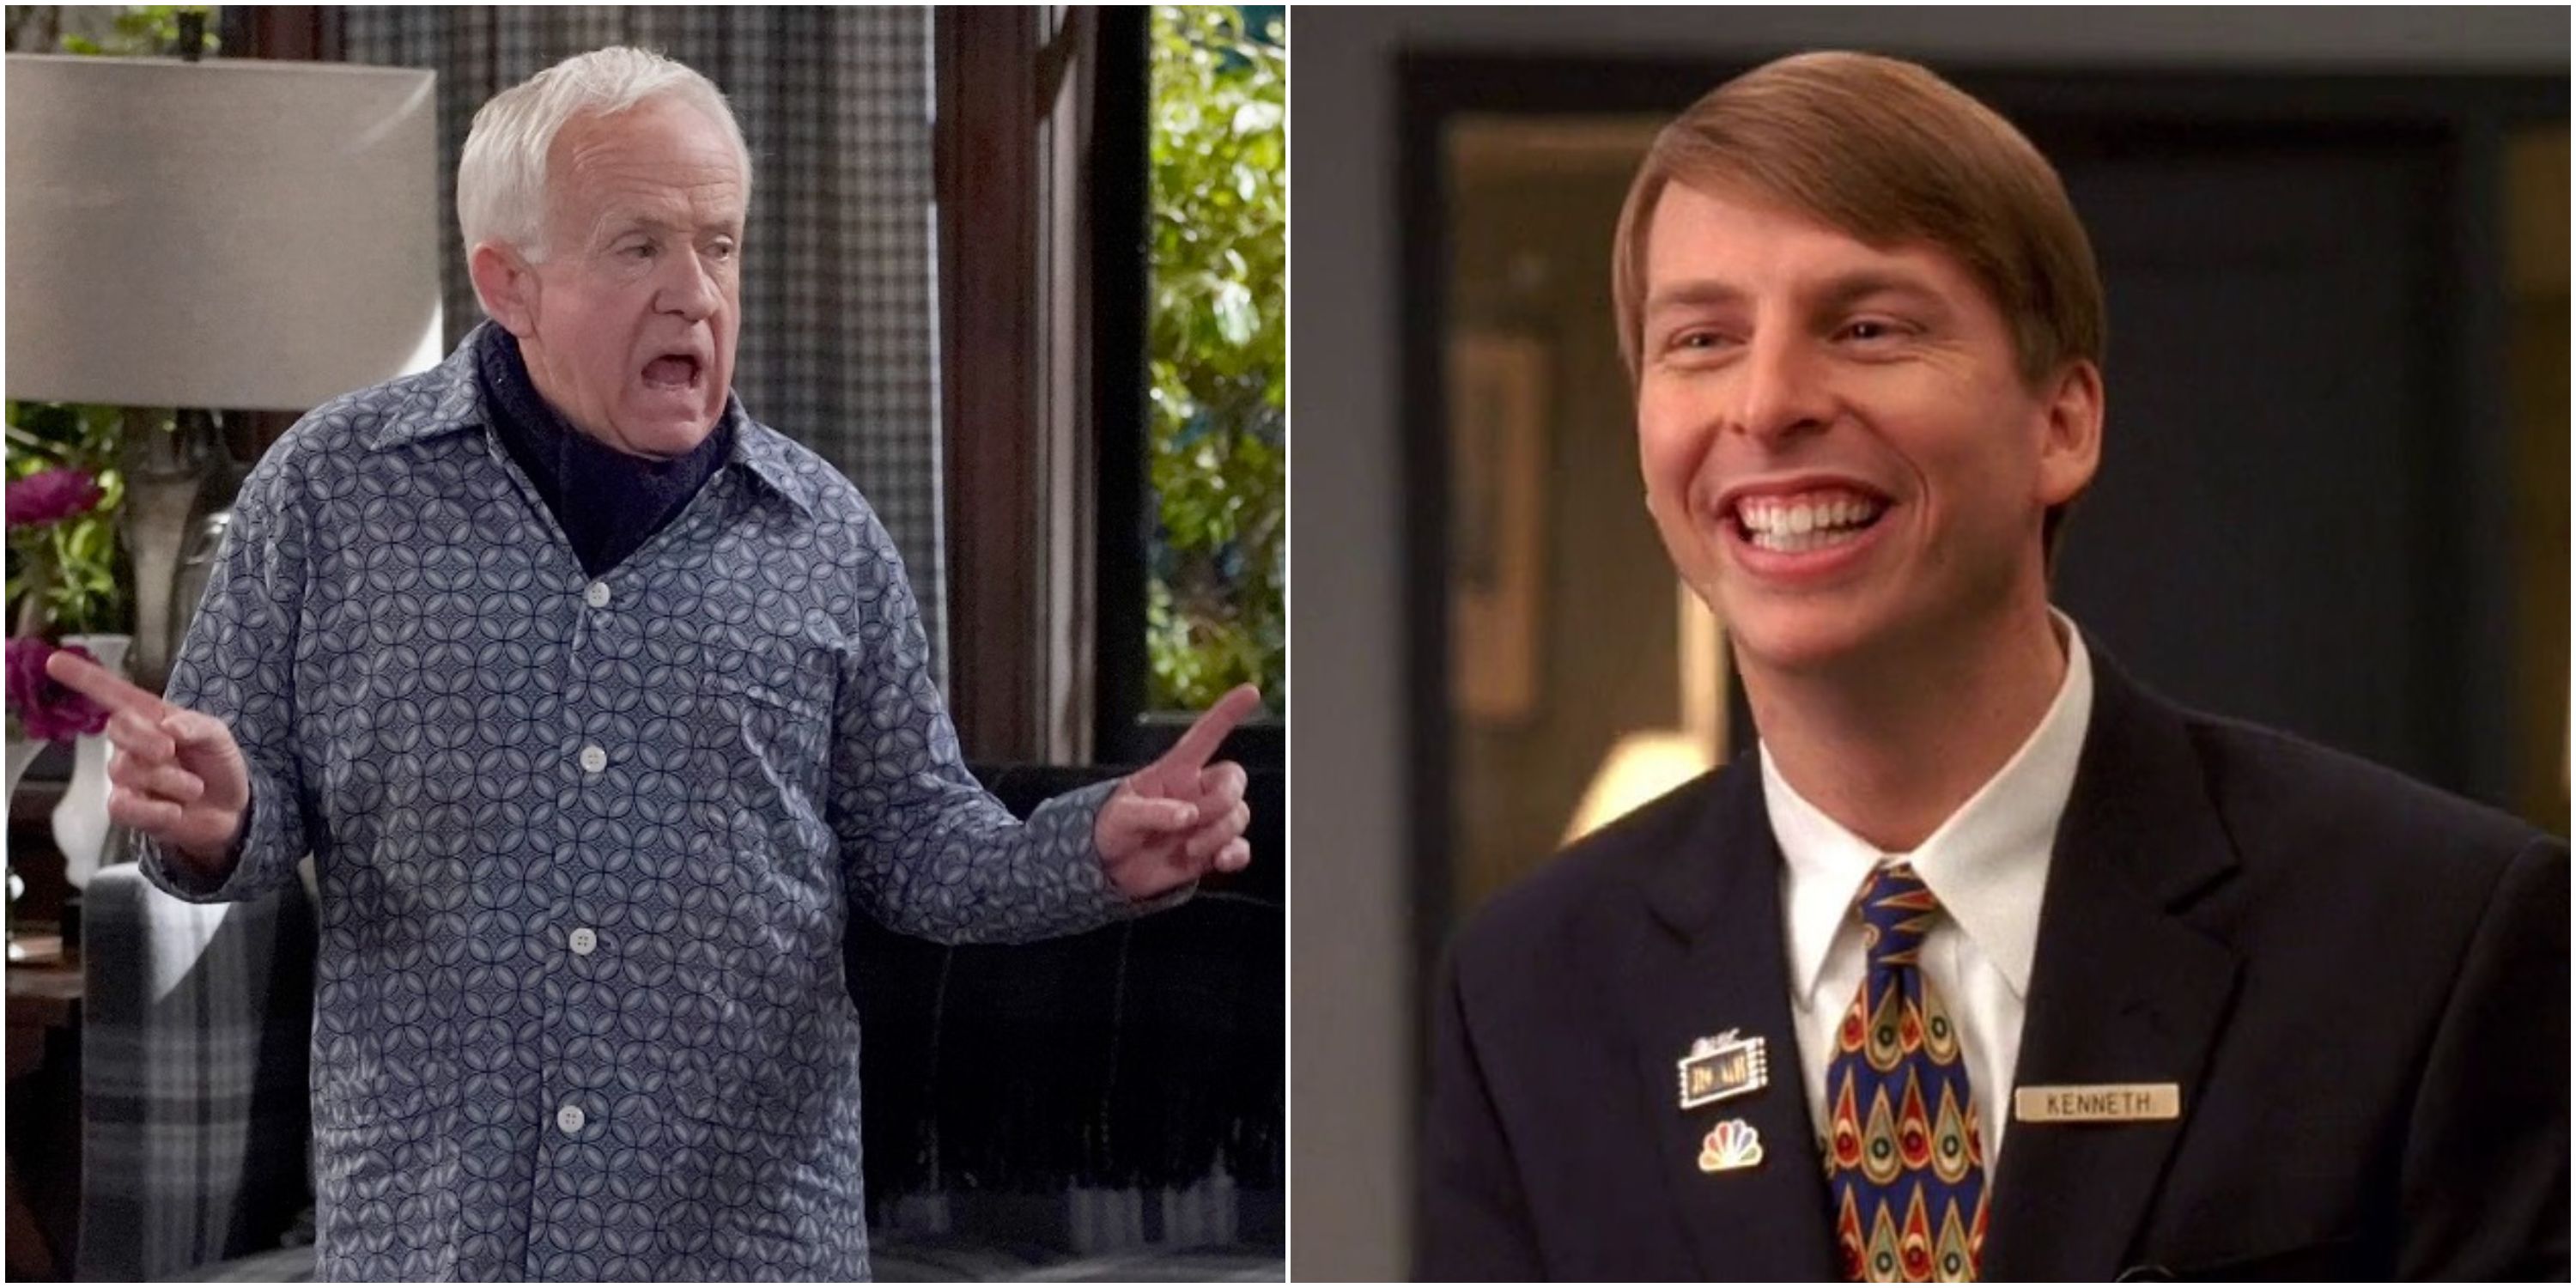 Beverly Leslie in Will & Grace and Kenneth Parcell in 30 Rock